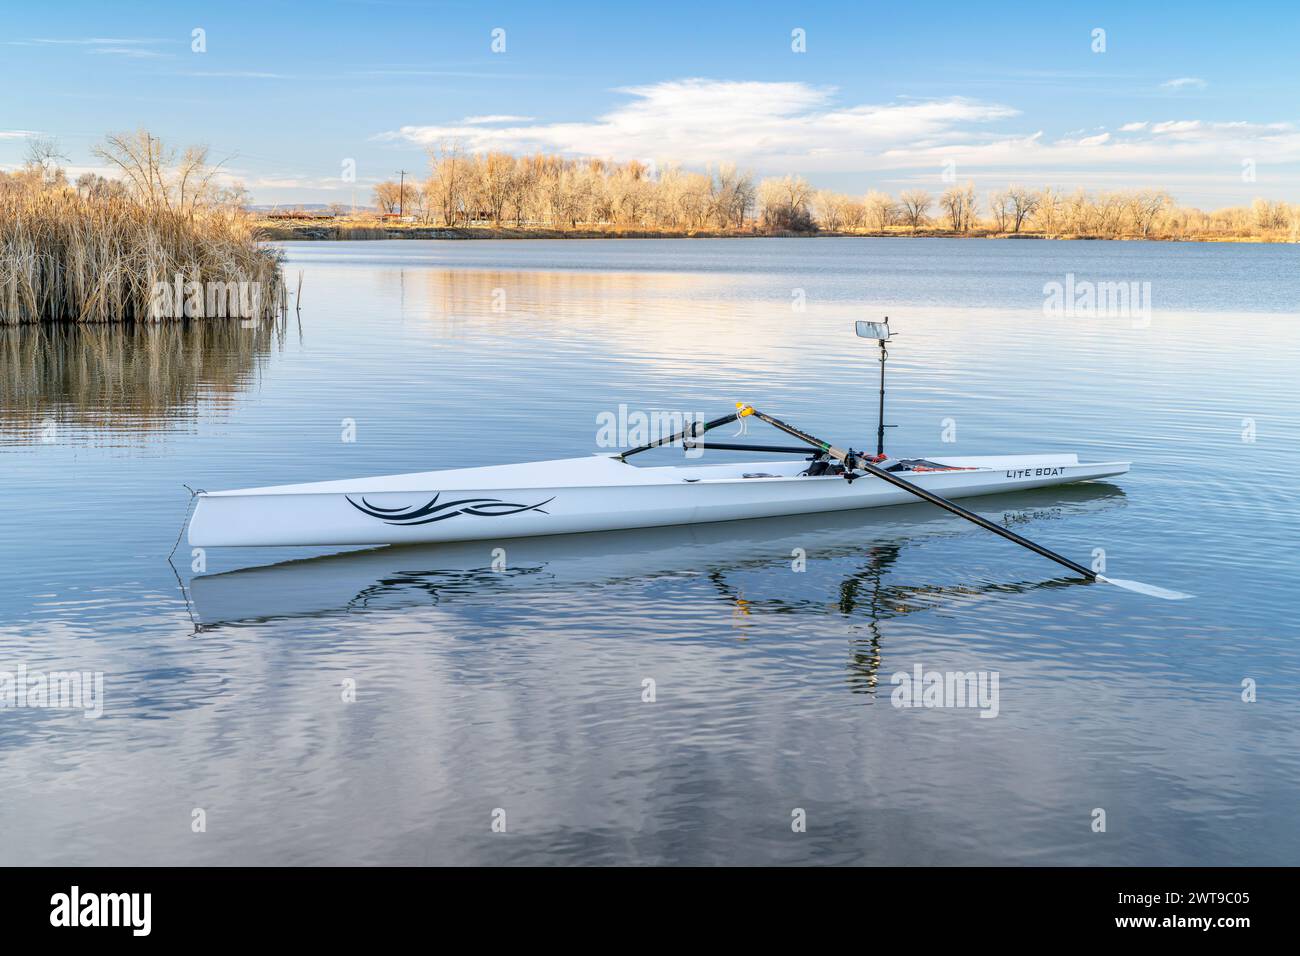 Fort Collins, CO, USA - March 1, 2024: Coastal rowing shell by Liteboat on a lake in northern Colorado in winter or early spring scenery. Stock Photo